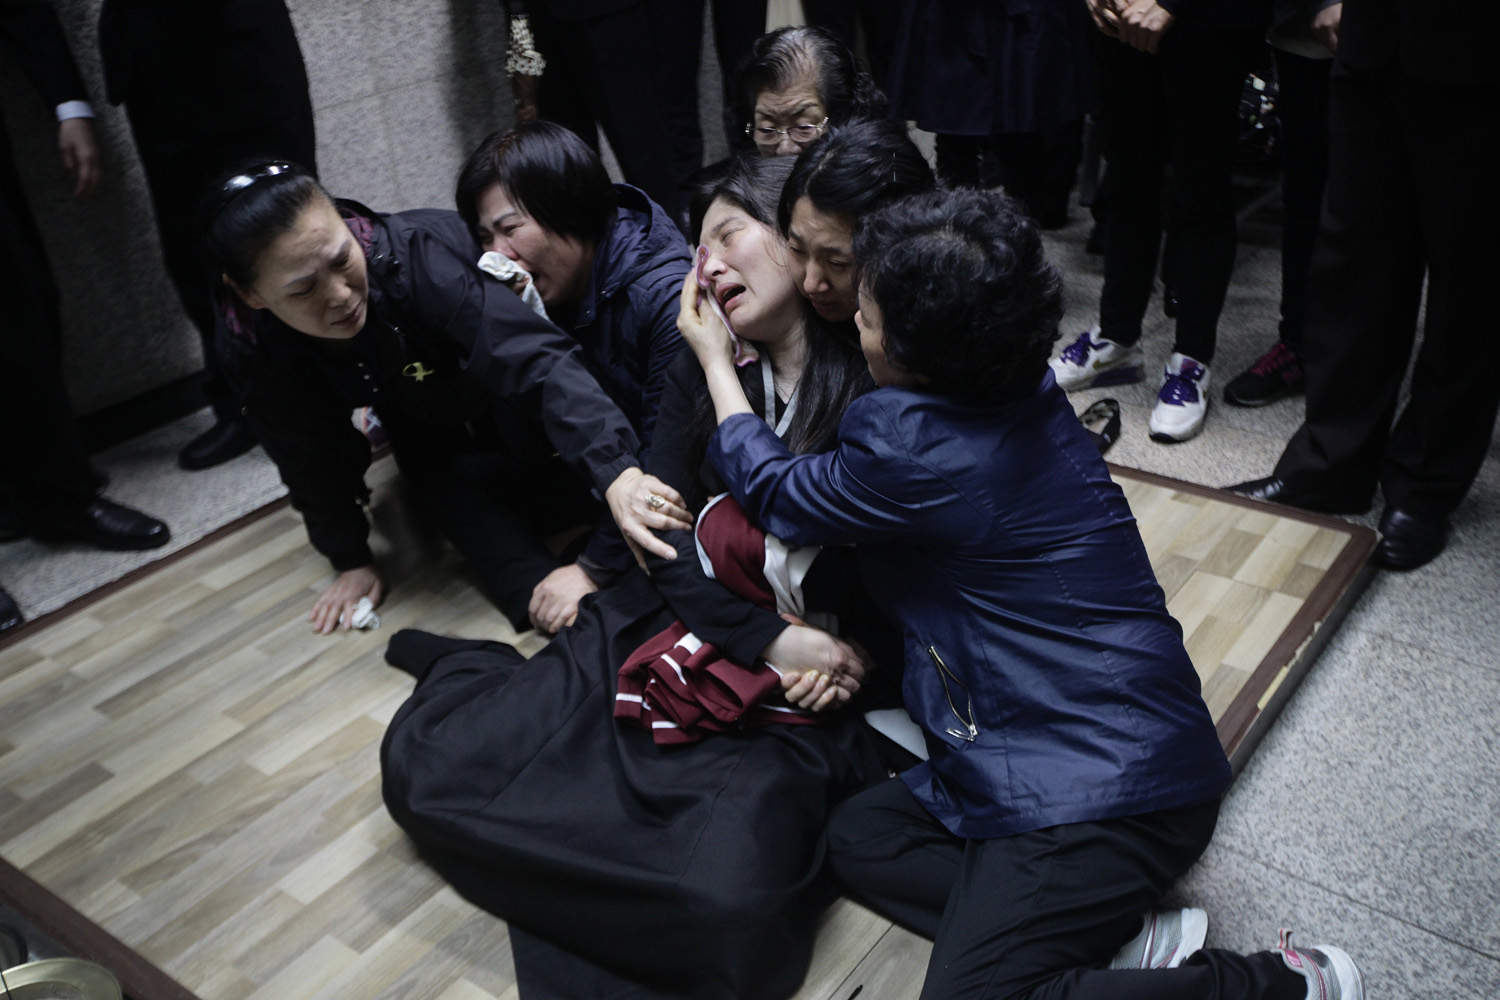 Eom Ji-young, center, mother of Park Yae-ji, a 16-year-old victim of the sunken Sewol ferry accident, collapses in grief as her daughter's remains enter the kiln at a crematorium in Suwon, South Korea.